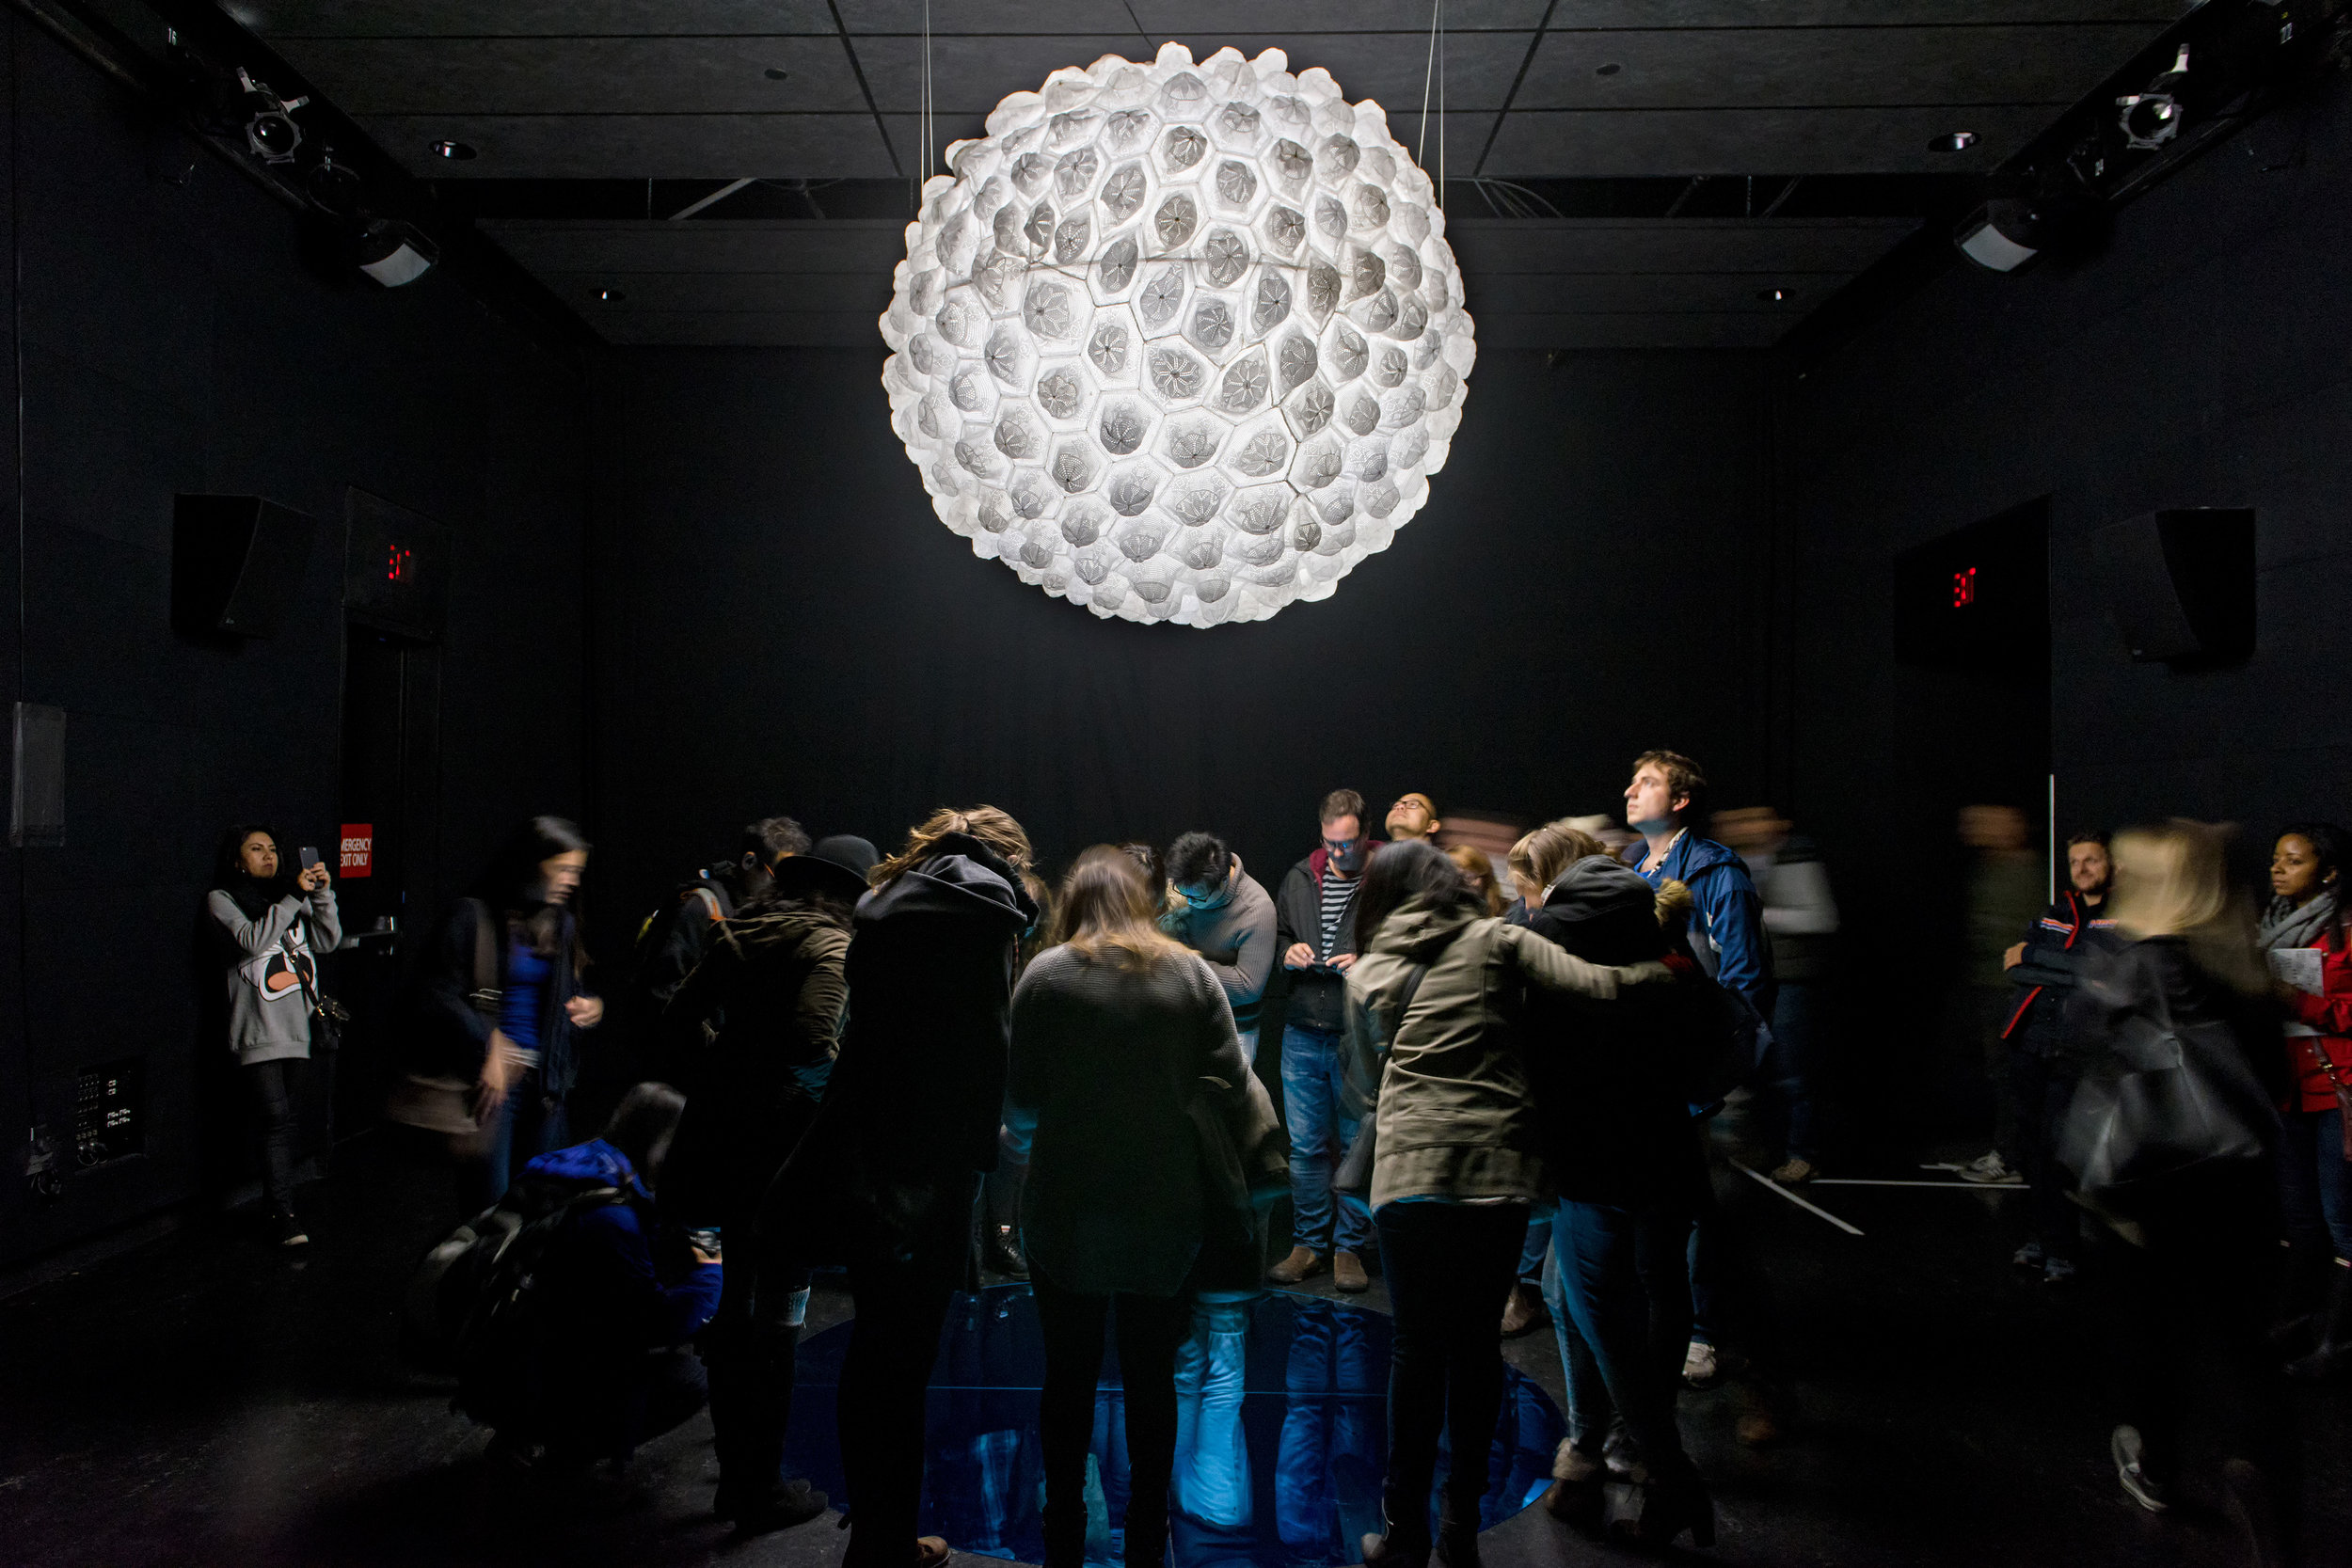   Light Upon Light (Nurun 'ala Nur) ,&nbsp;2015,&nbsp;Interactive/immersive installation,&nbsp;Hand-stitched white crouched taqiyah (skullcaps), LED light,&nbsp;Perspex dome and mirror, &nbsp;dimension variable 